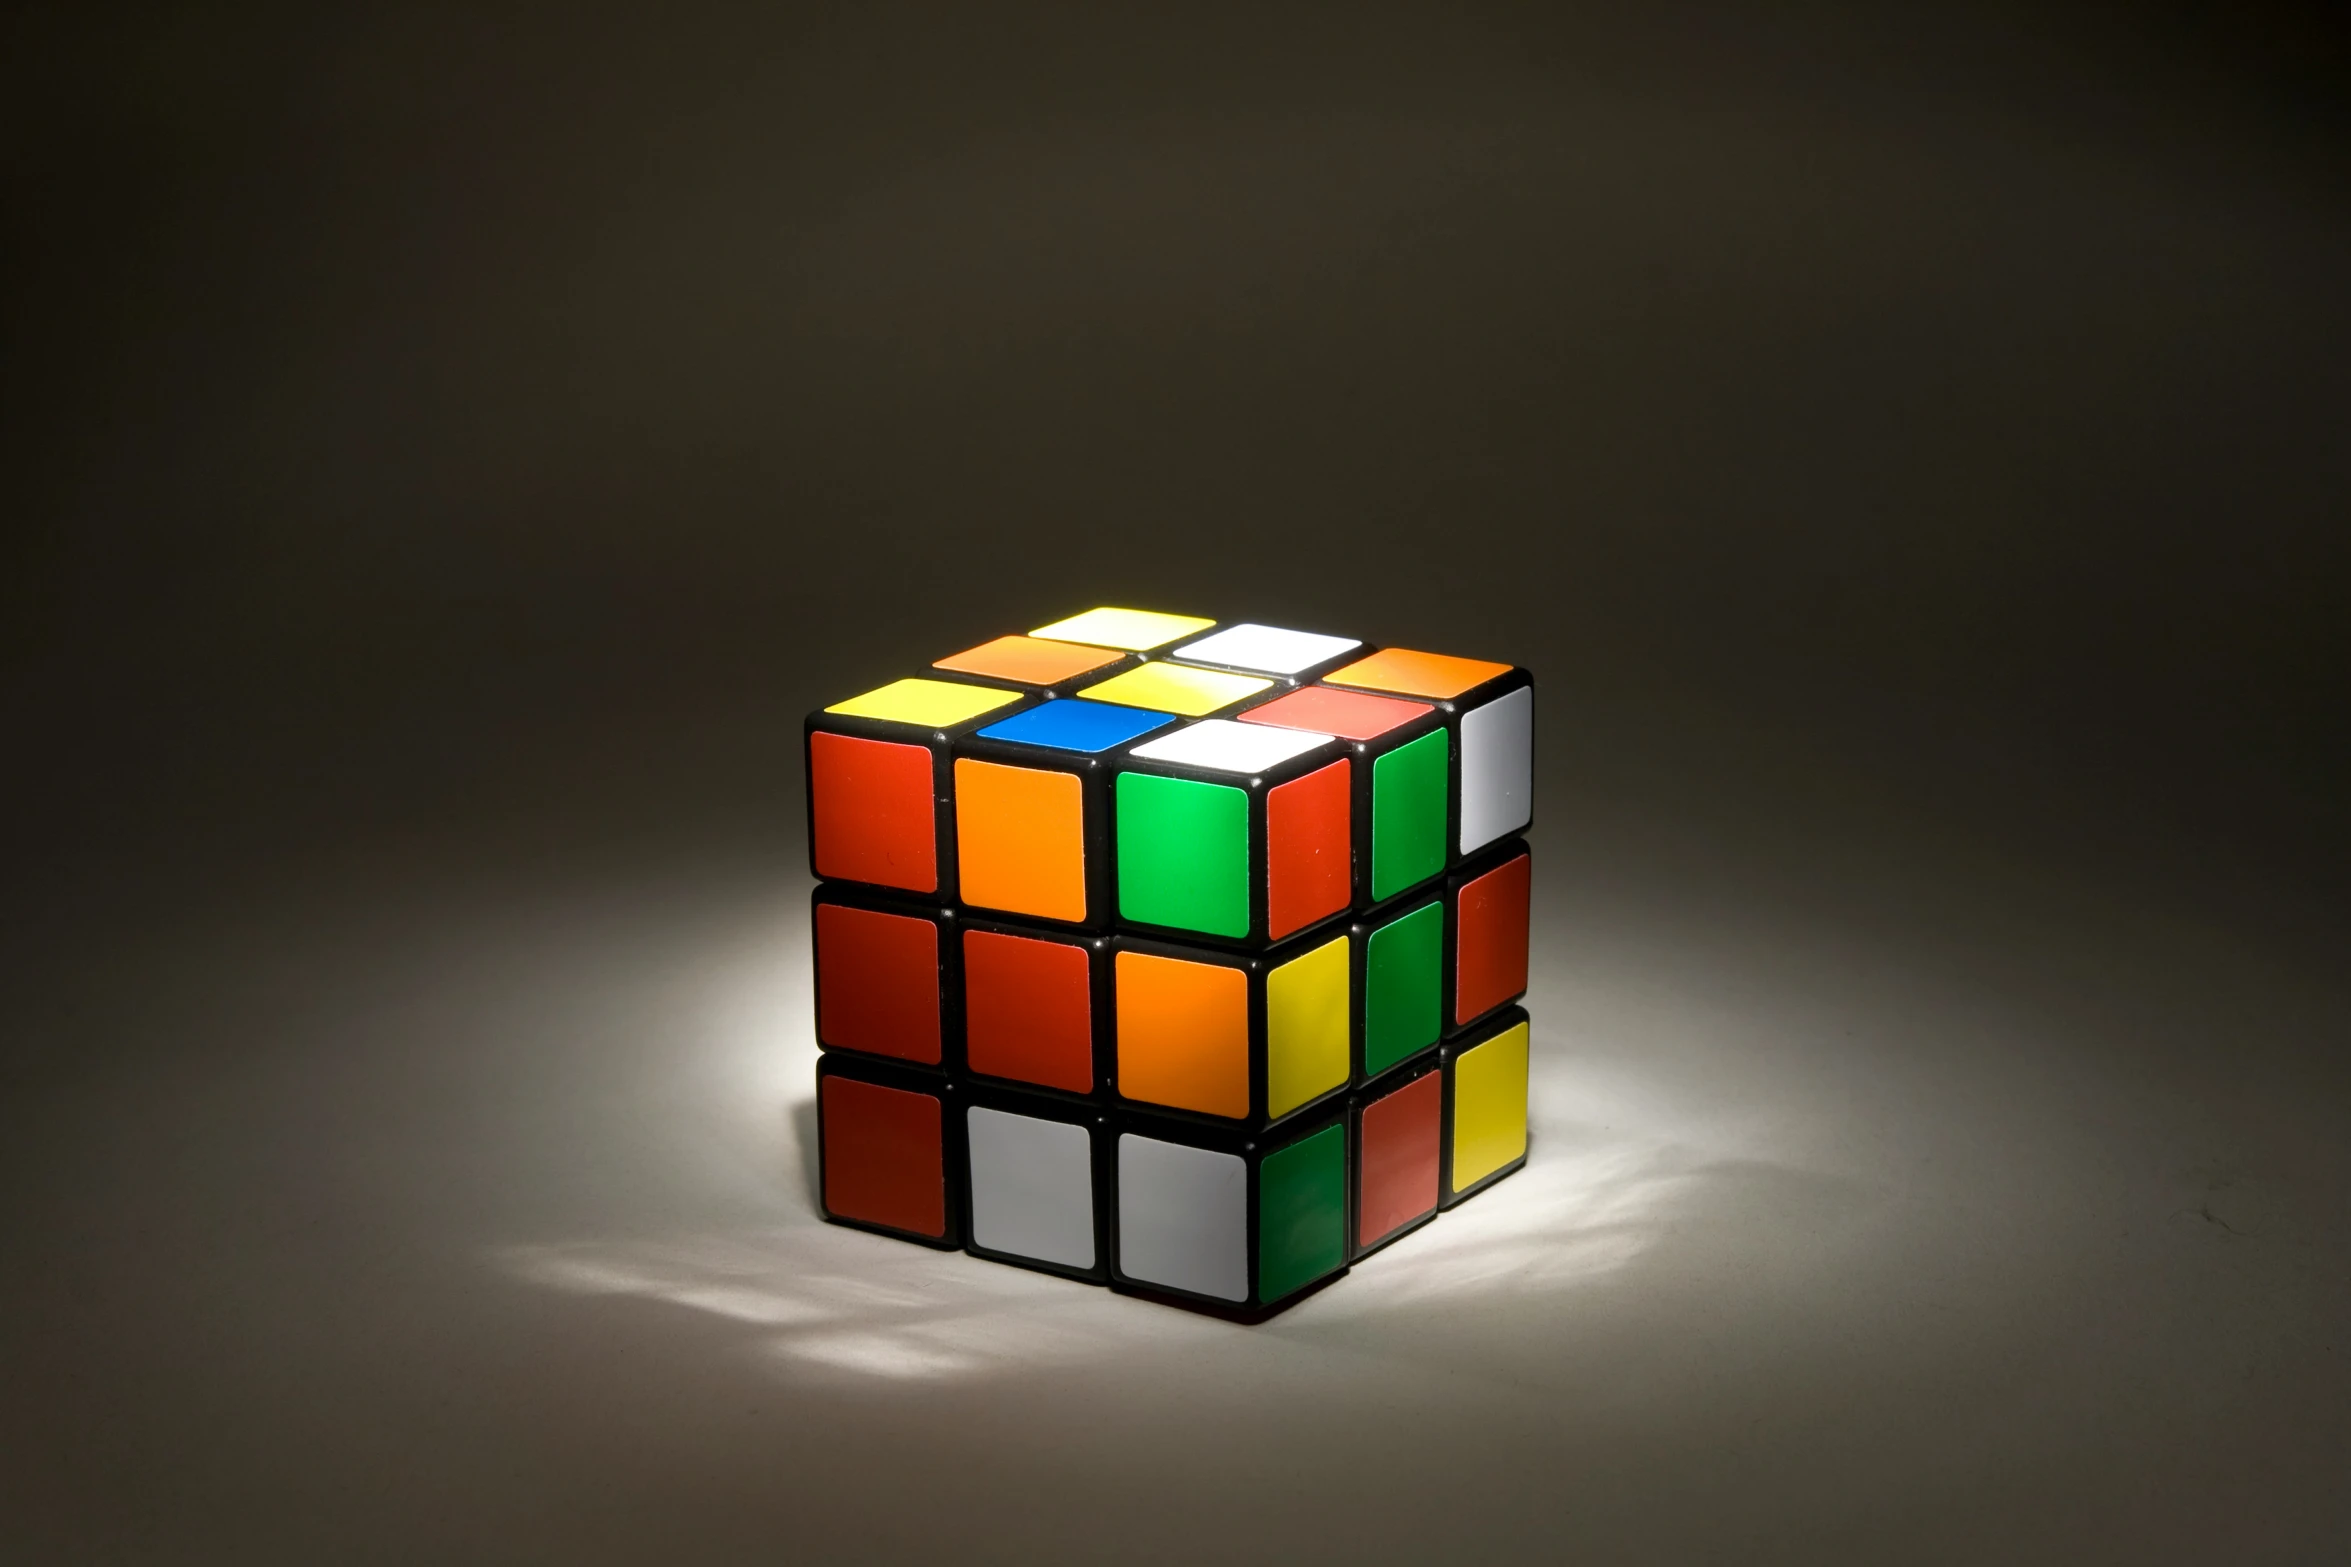 an illuminated rubik cube is shown with the light shining on it